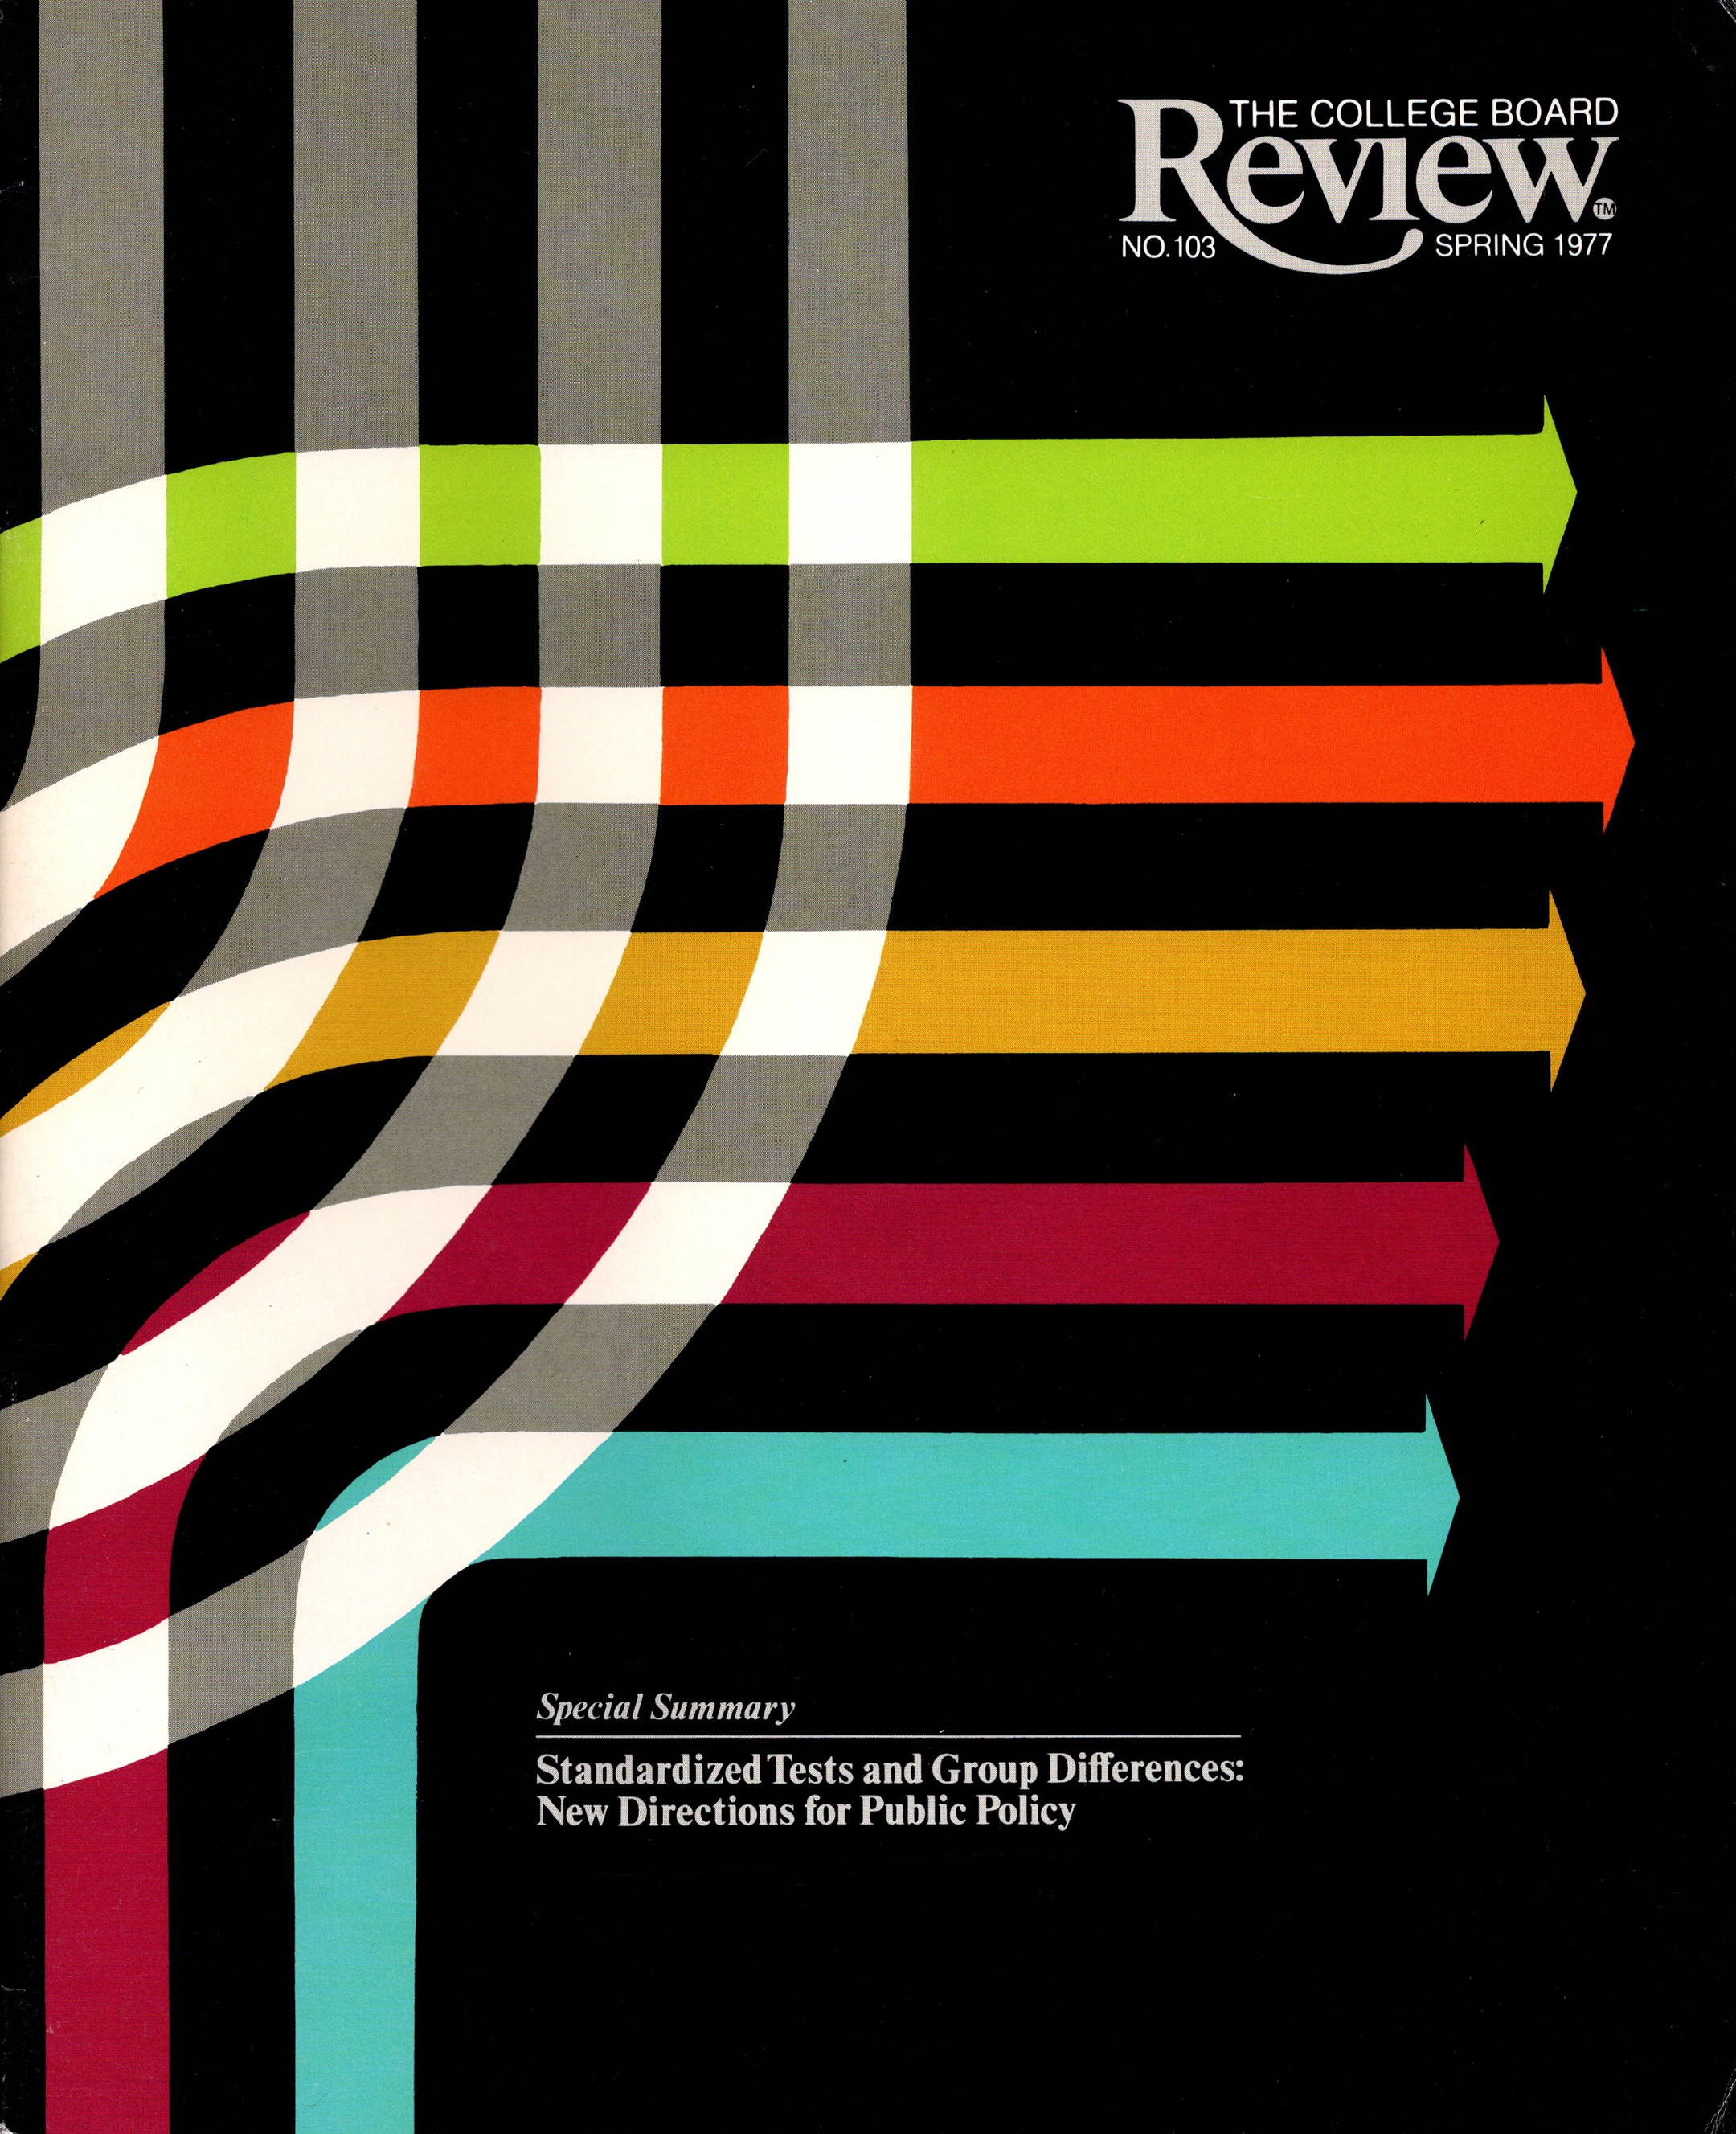 the spring 1977 cover of the college board review magazine